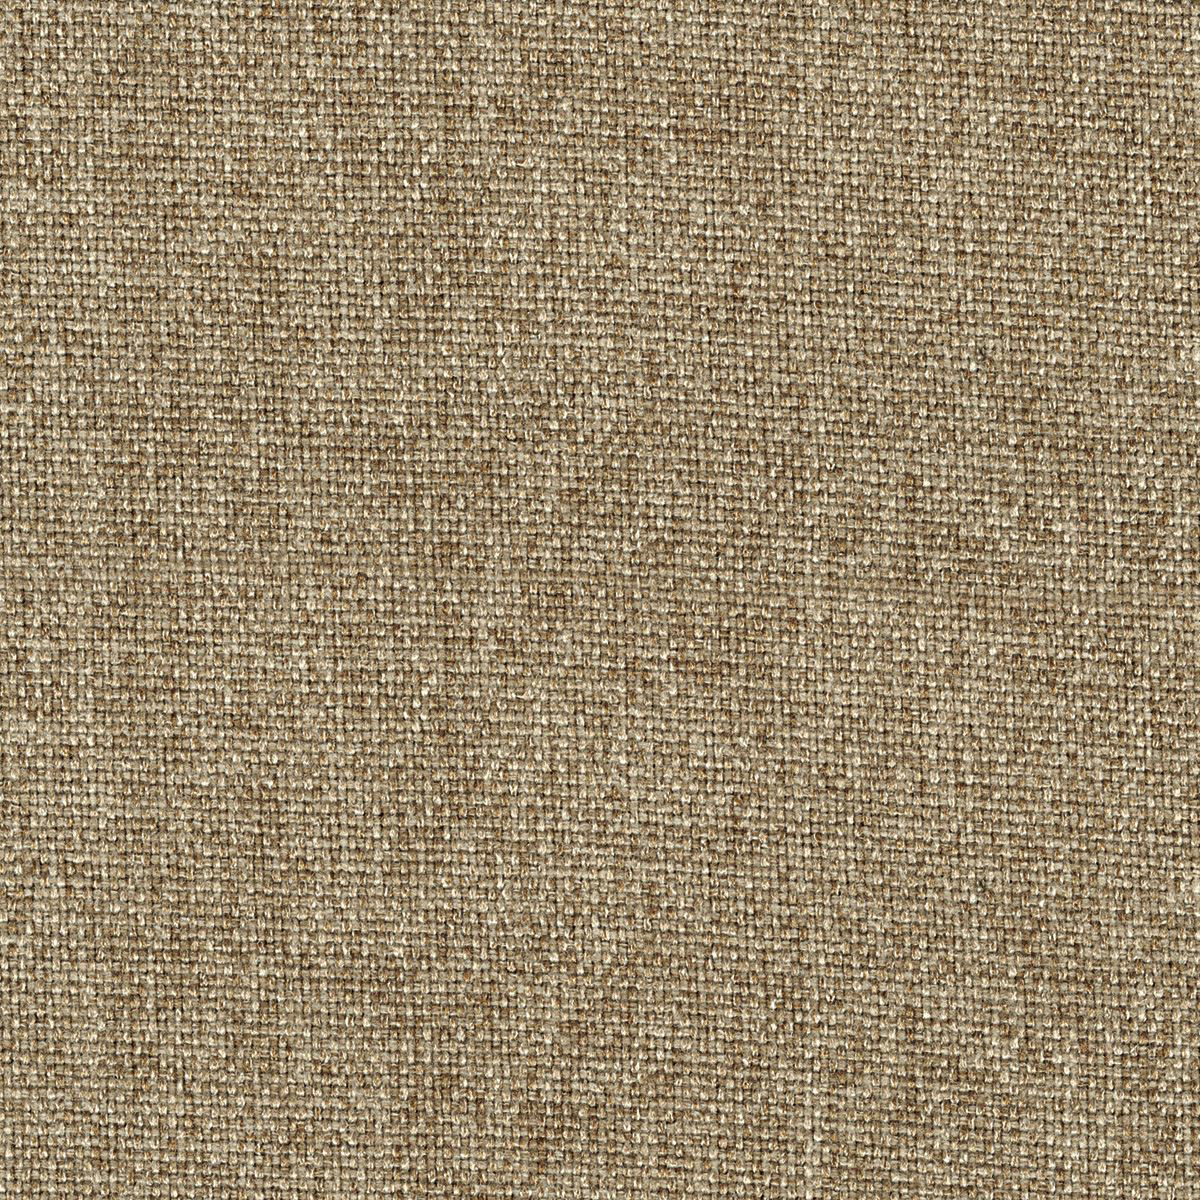 Picture of Accent Chair in Khaki